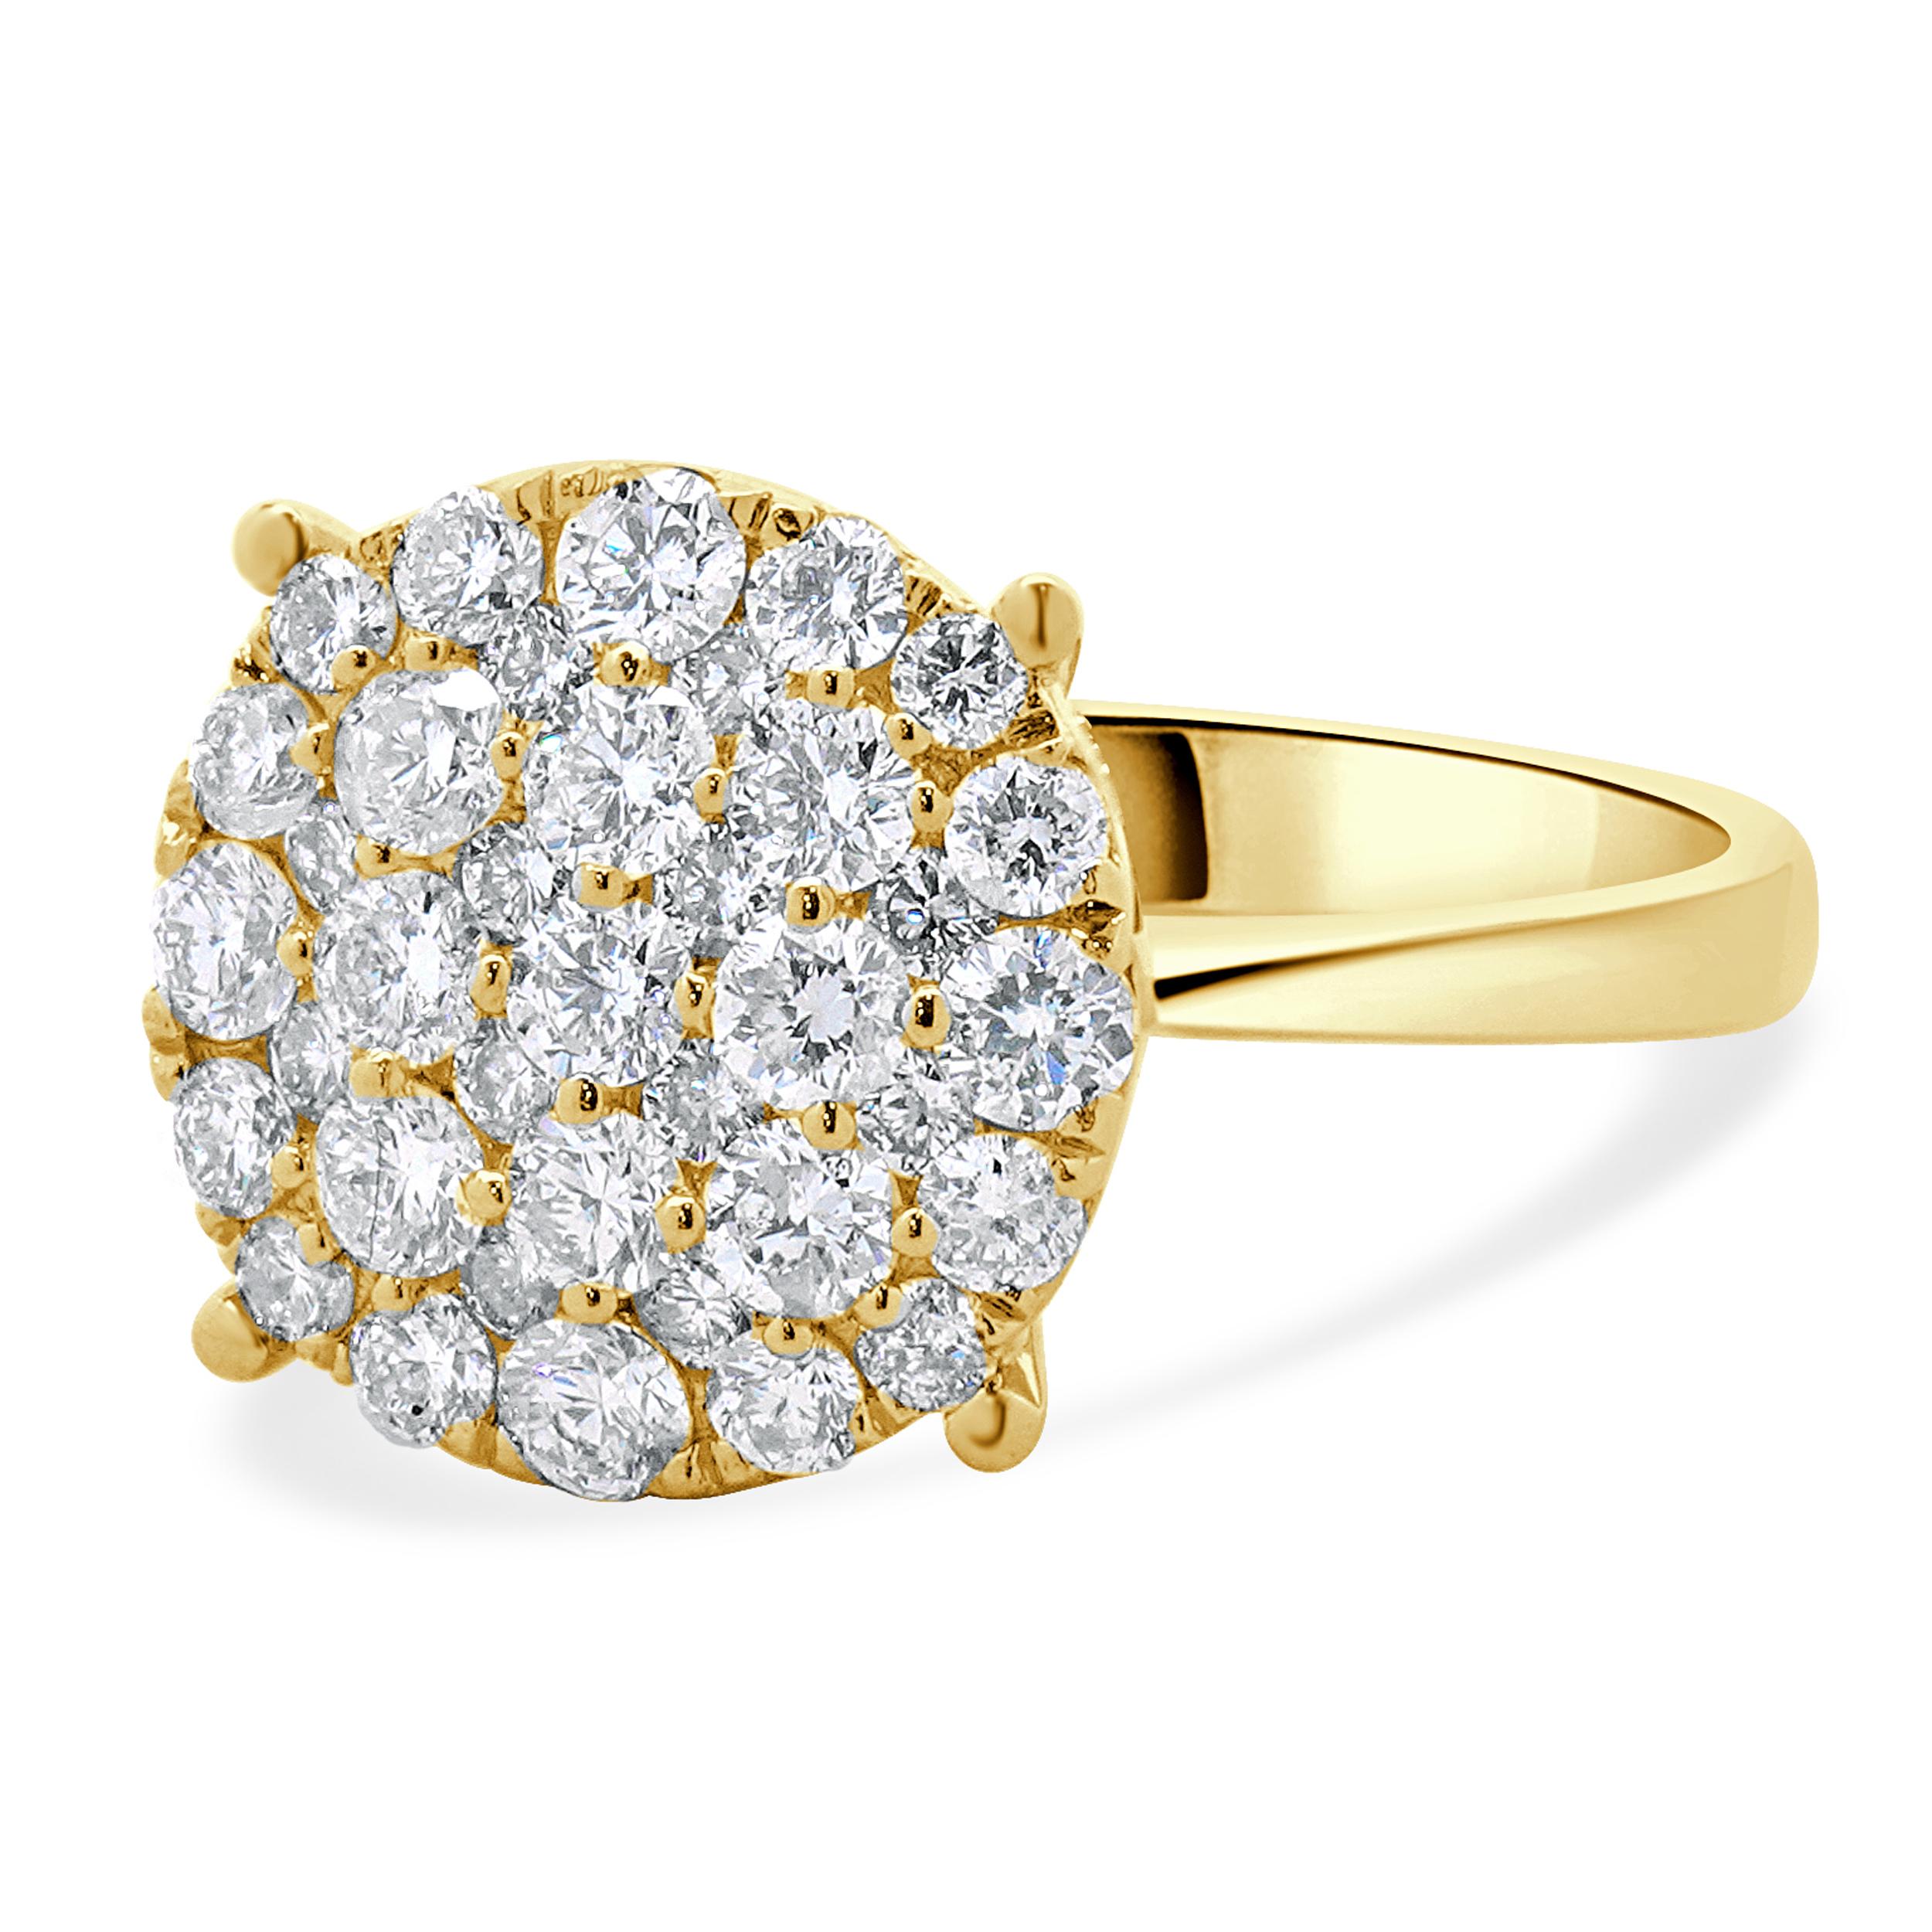 Designer: custom
Material: 14K yellow gold
Diamond: 40 round brilliant cut = 1.20cttw
Color: G 
Clarity: SI2-I1
Dimensions: ring top measures 11.4mm wide
Ring Size: 6 (complimentary sizing available)
Weight: 2.85 grams